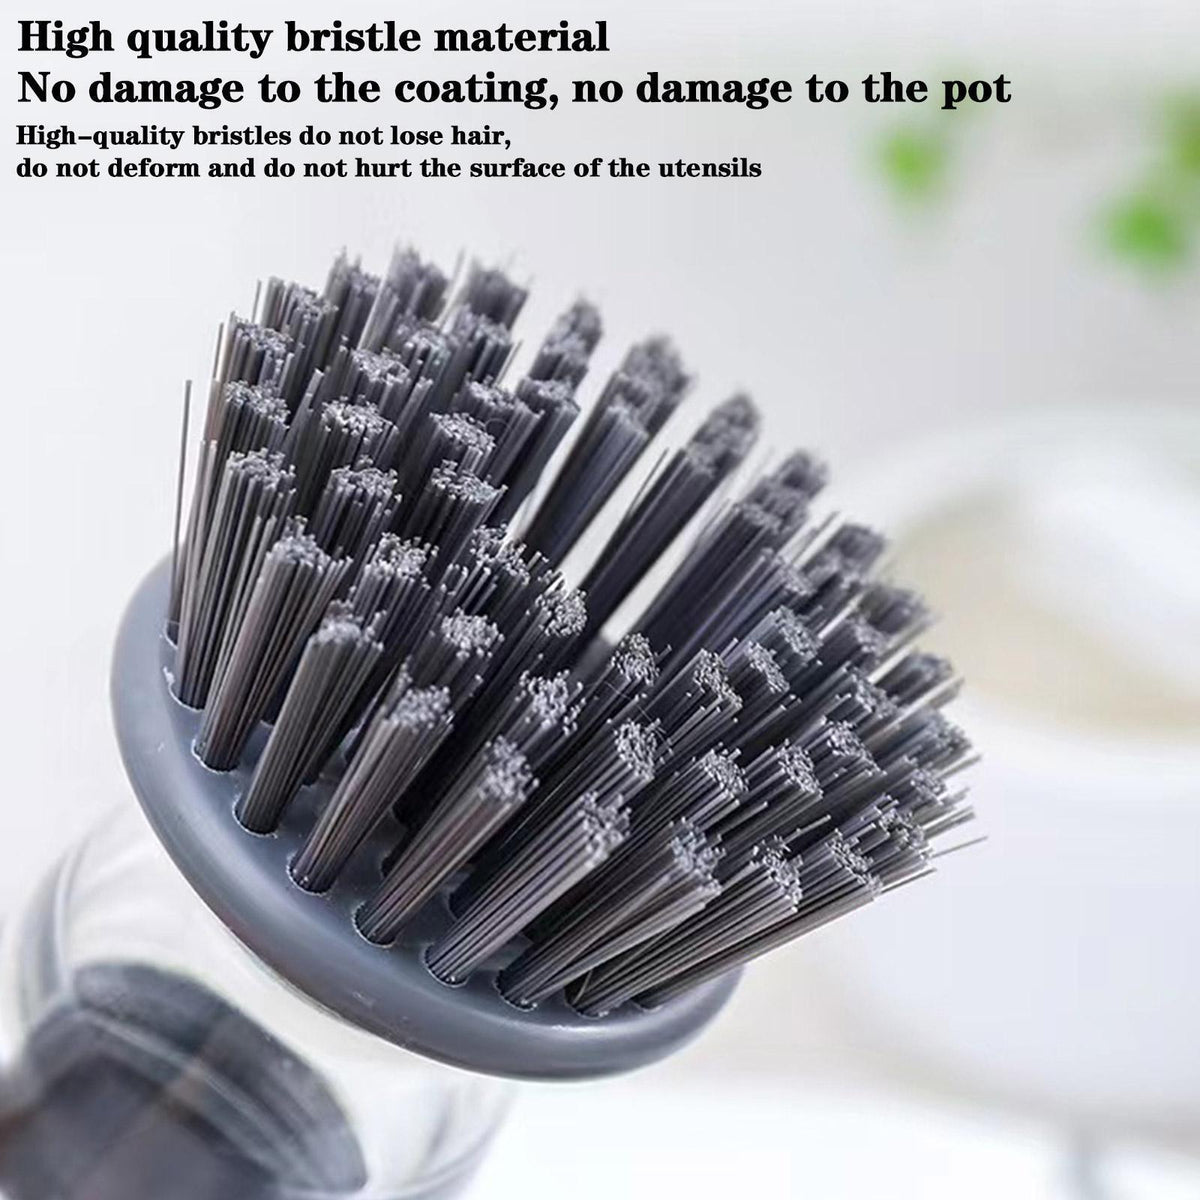 PALM BRUSH for Dispensing Stainless Steel Cleaner – Health Craft